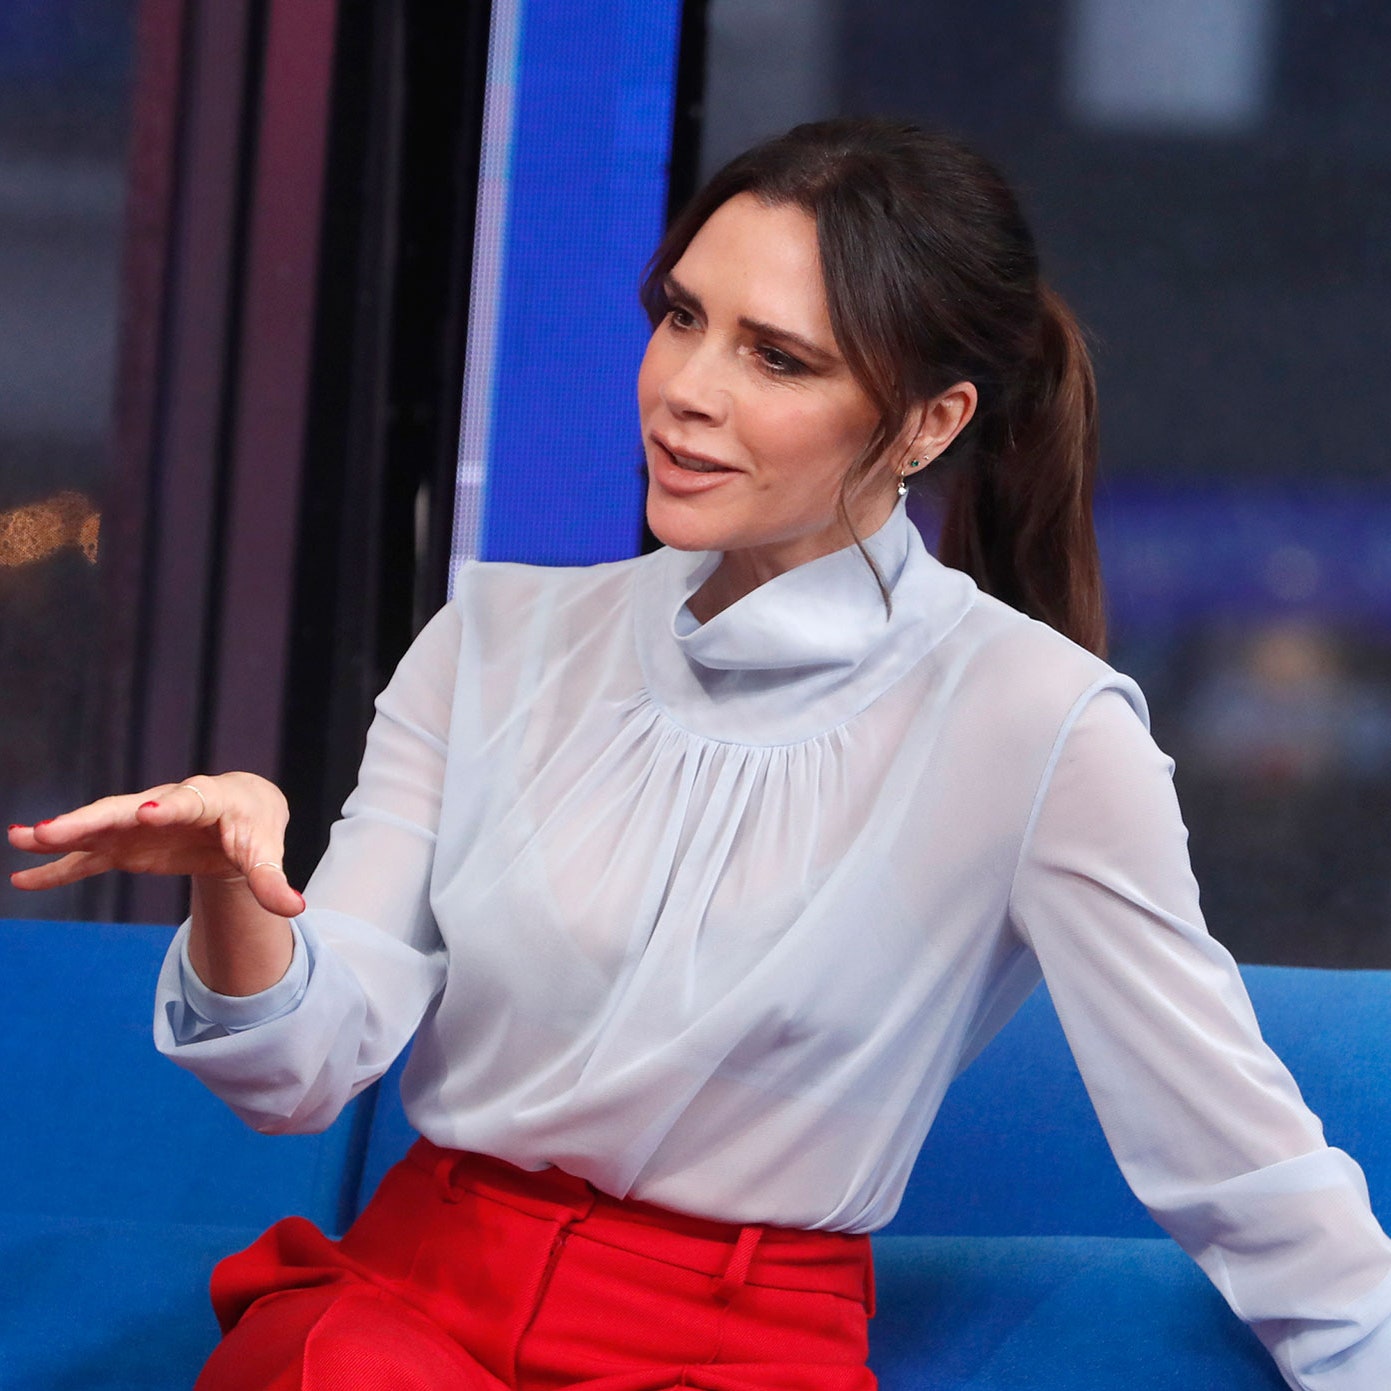 Victoria Beckham On Why She'll Remain A Spice Girl For Life